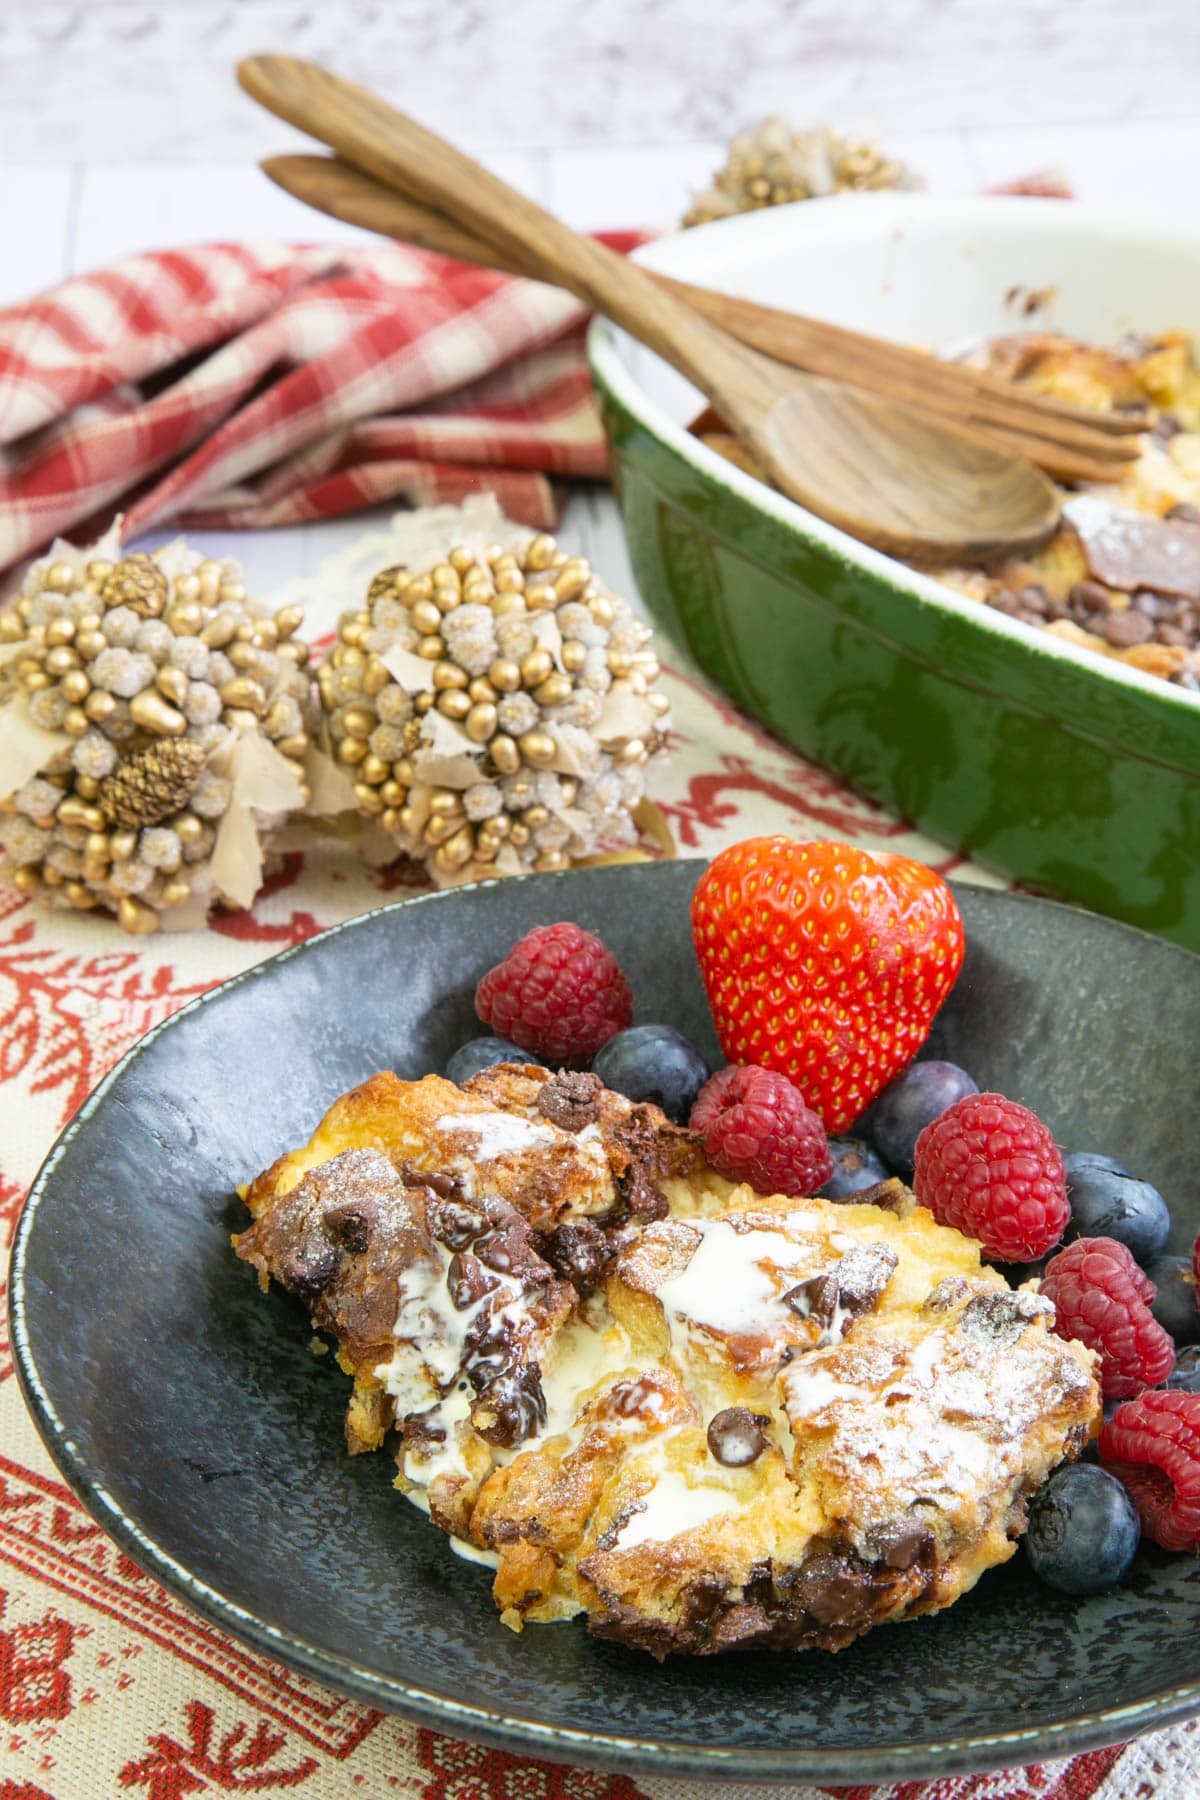 Fresh berries make the finishing touch for this gorgeous bread and butter pudding.